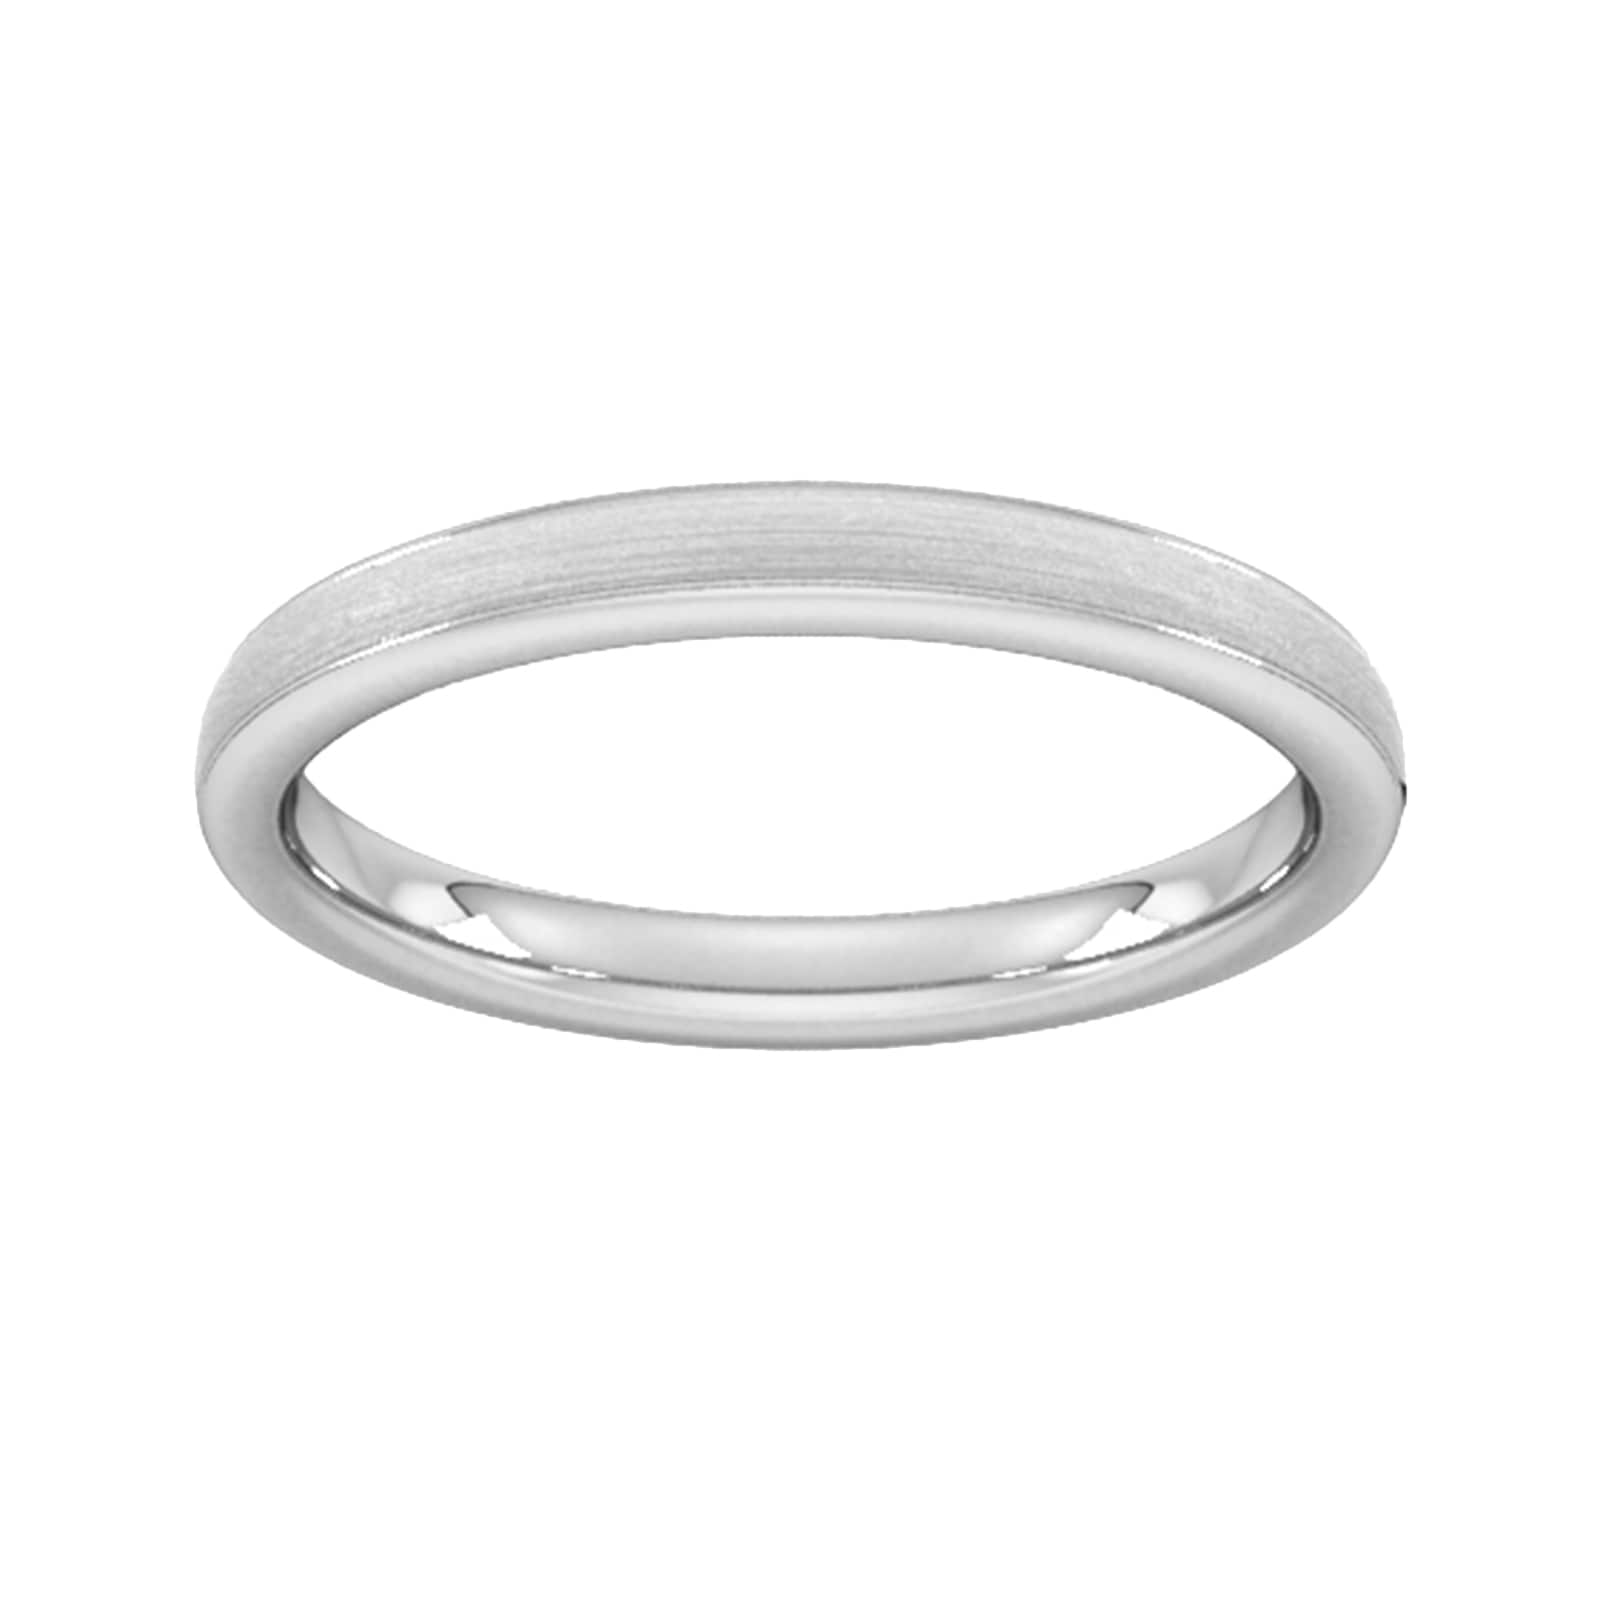 2.5mm Slight Court Extra Heavy Matt Centre With Grooves Wedding Ring In 18 Carat White Gold - Ring Size G